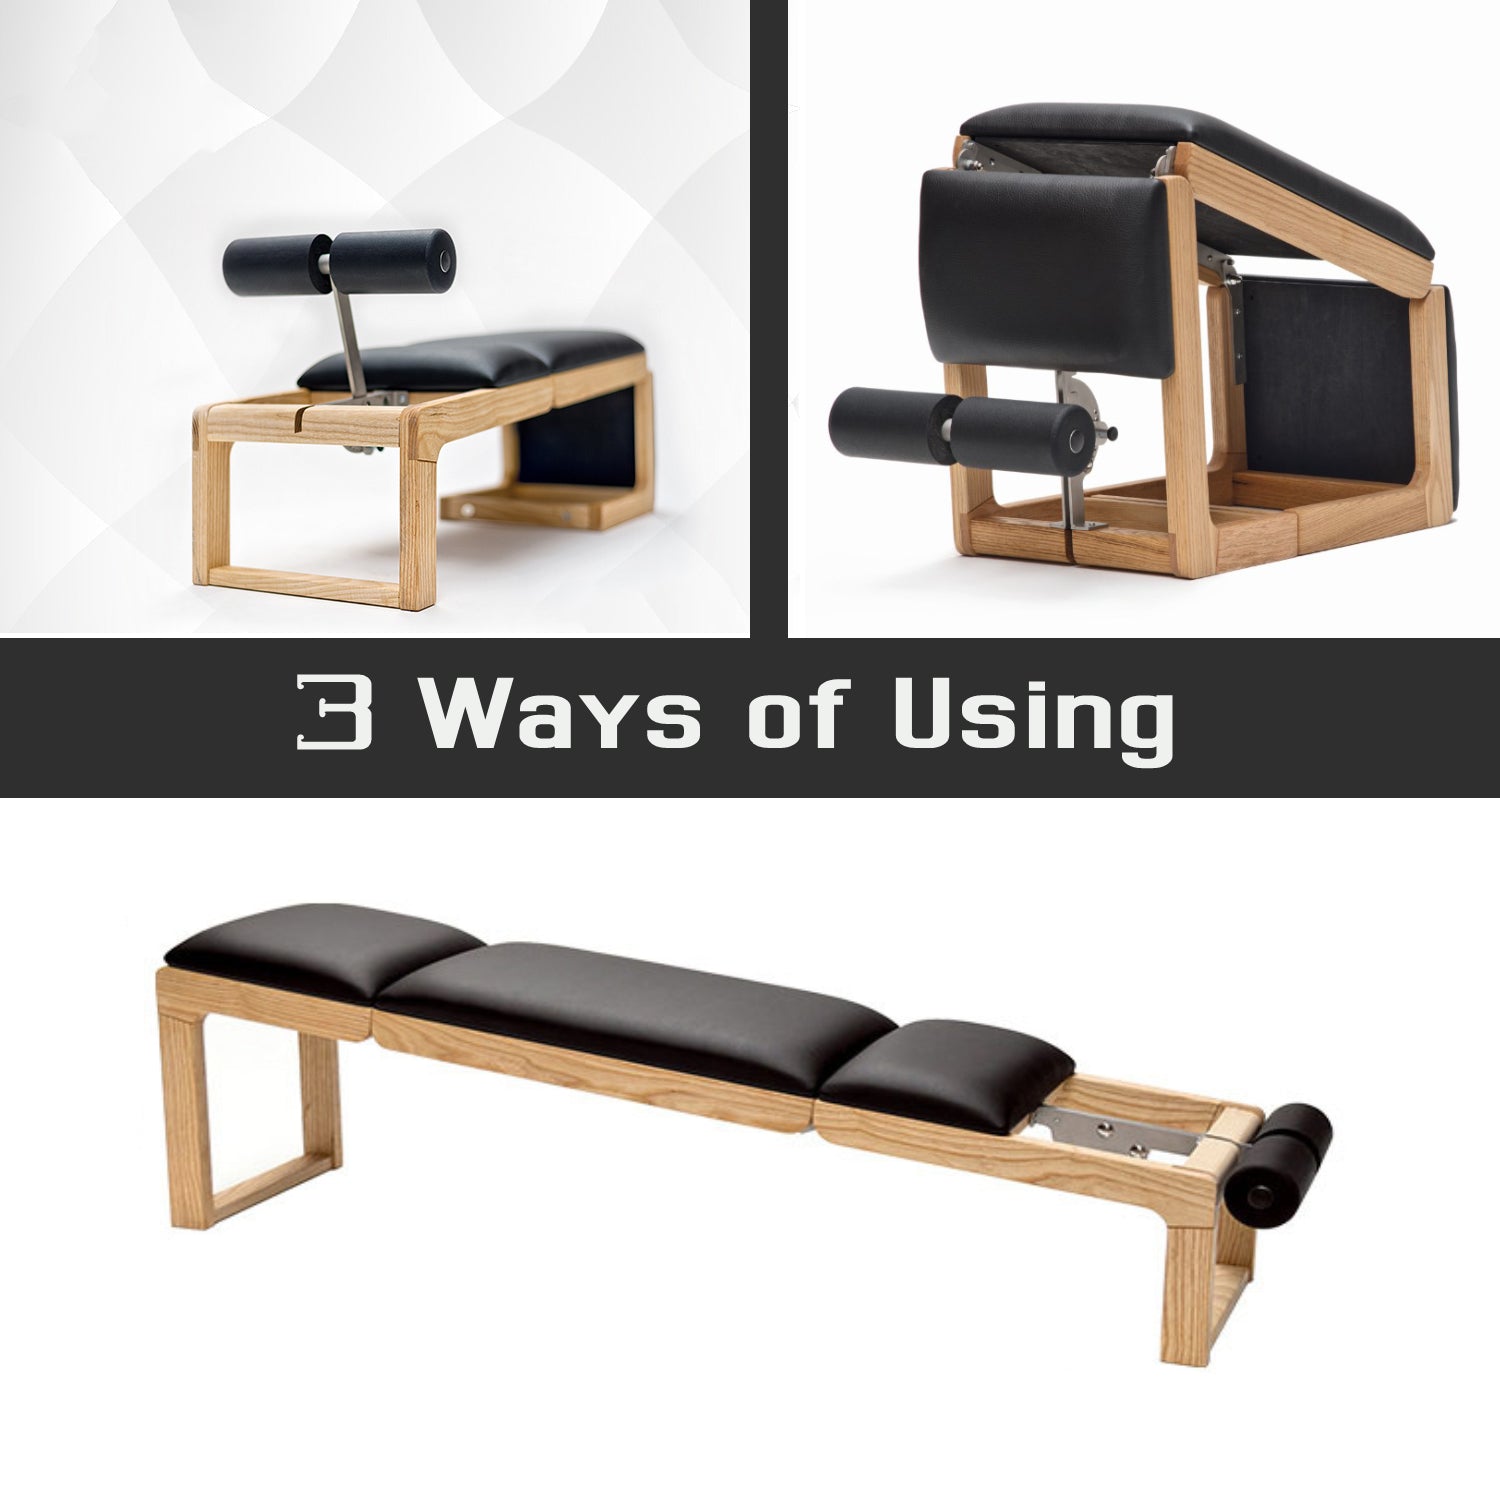 Pilates Foldable ABS Board Chair and Yoga Bed - 3 ways of using